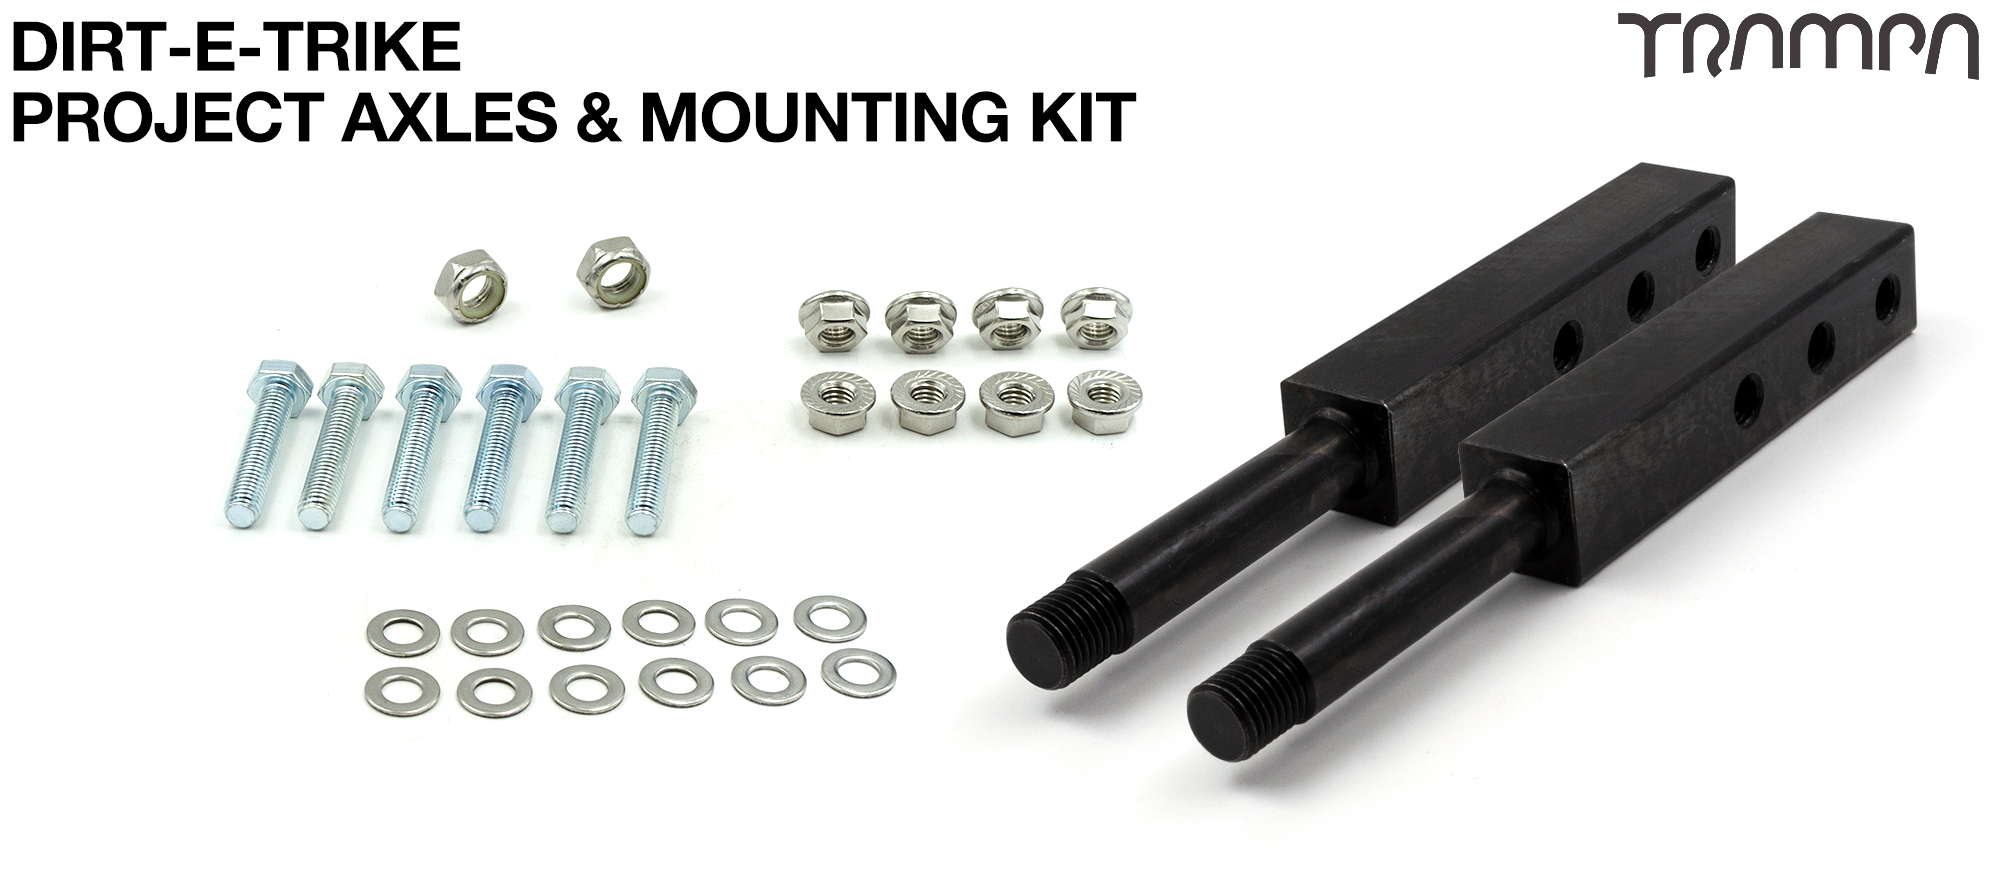 Dirt-E-Trike Project Axles & Mounting kit - TWIN